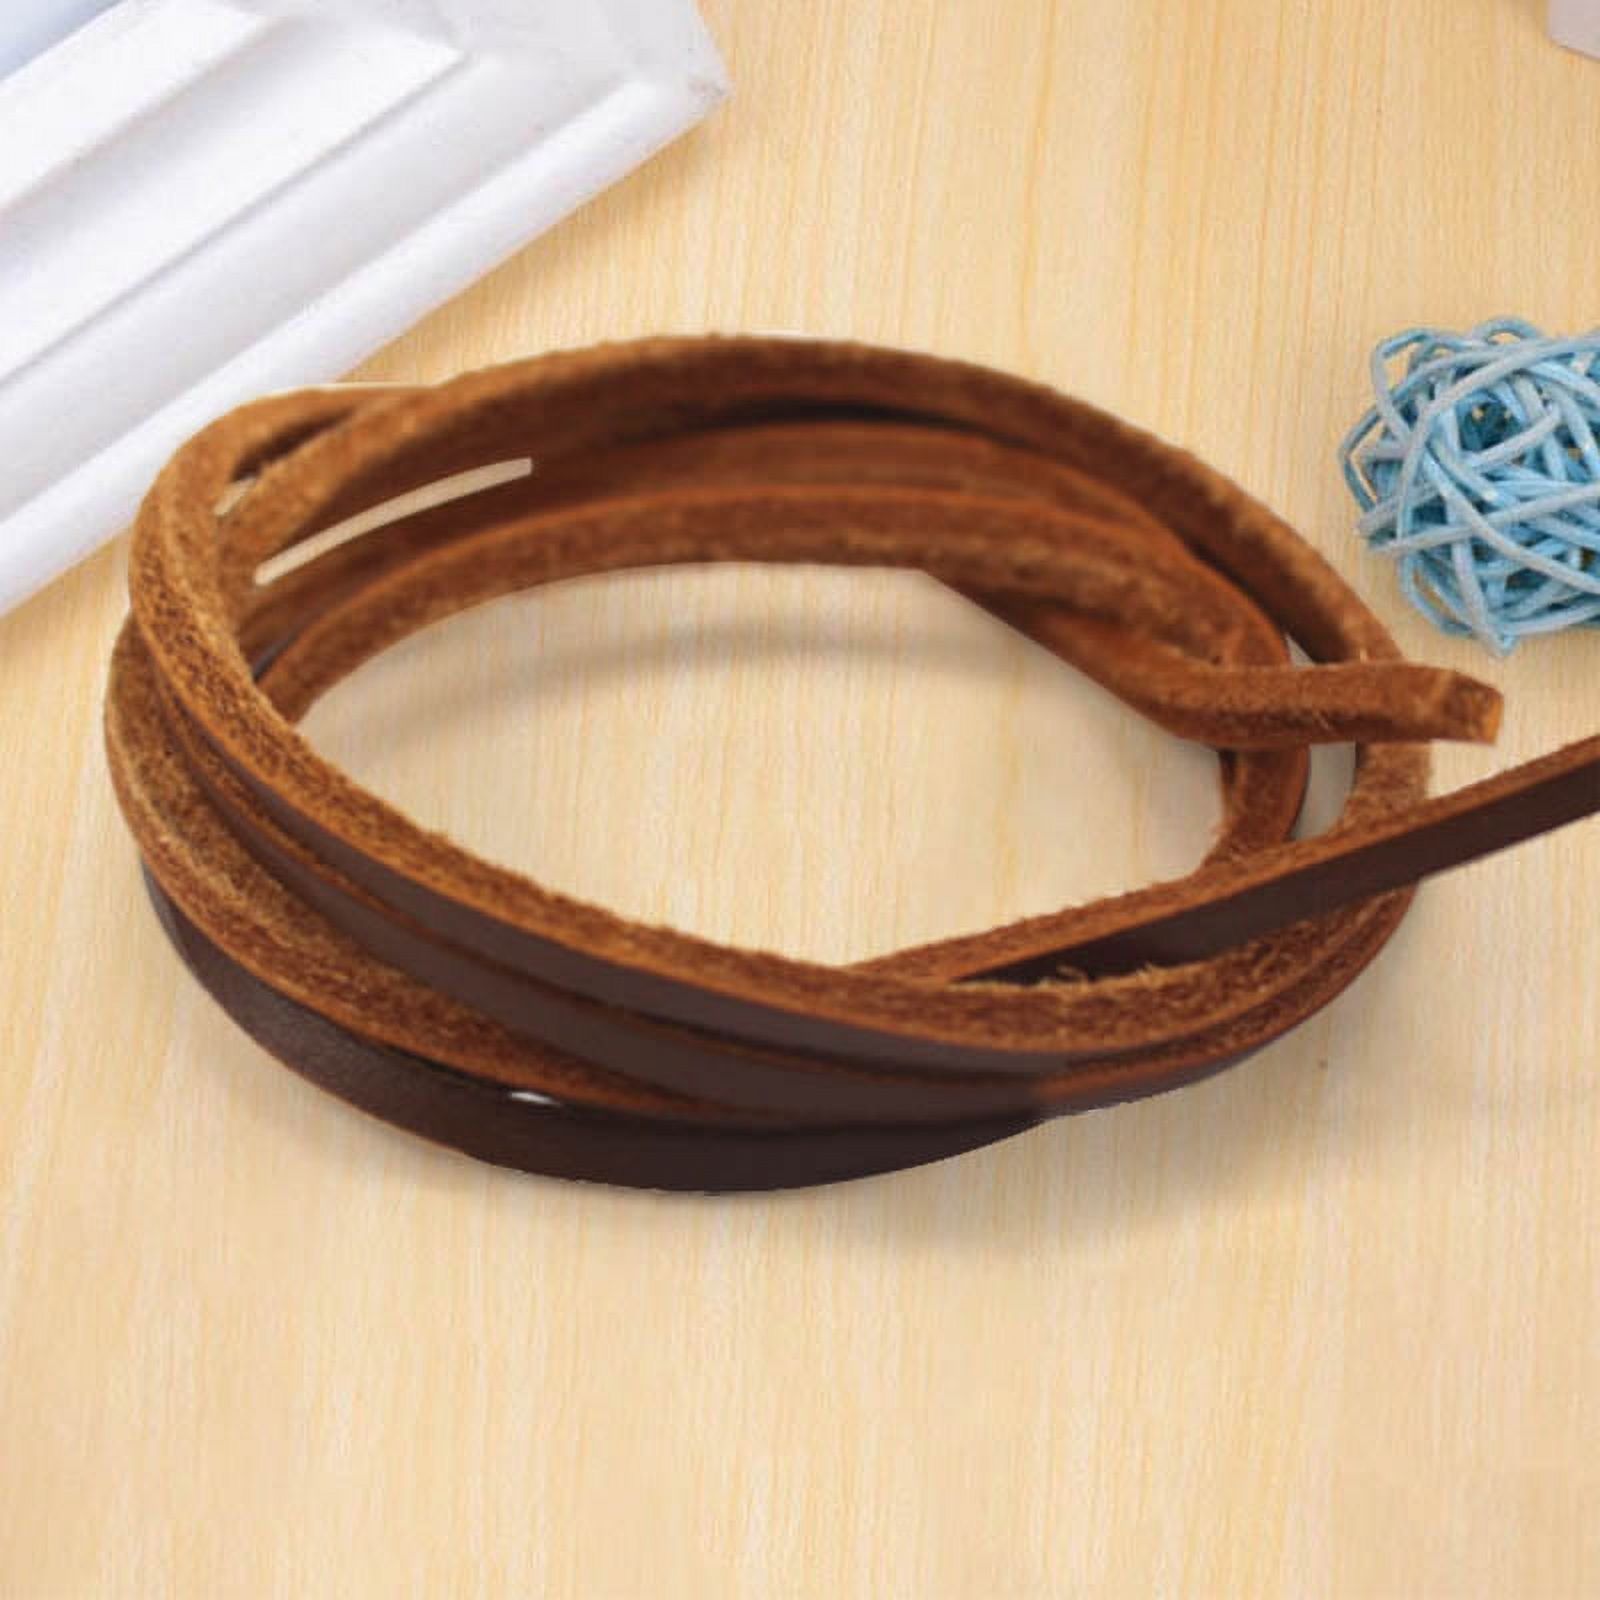 Leather Shoelaces Mens Boat Shoe Laces-Square Shoestring C9Q0 Leisure Thin K3N9 - image 1 of 9